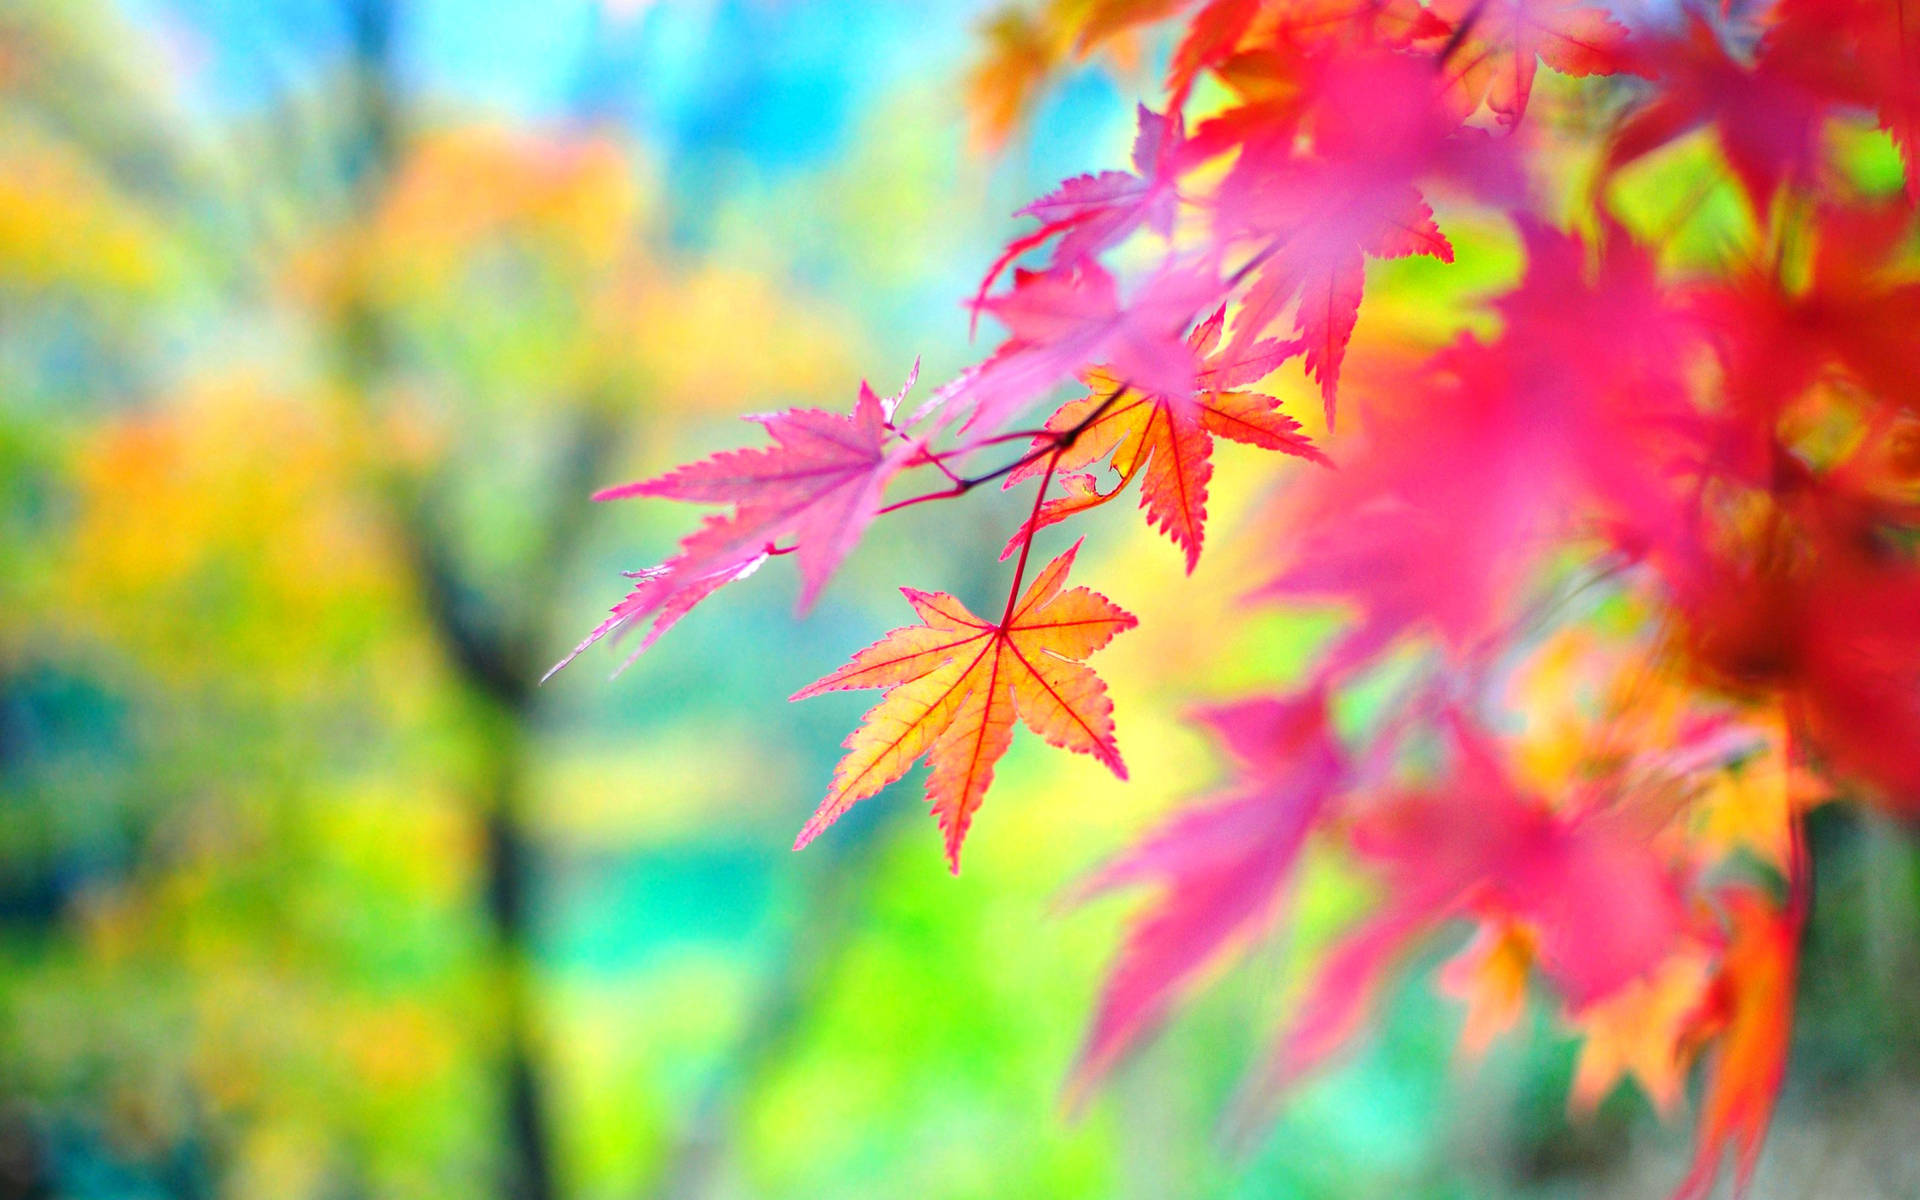 Captivating Autumn Scenery With Pink Leaves Background